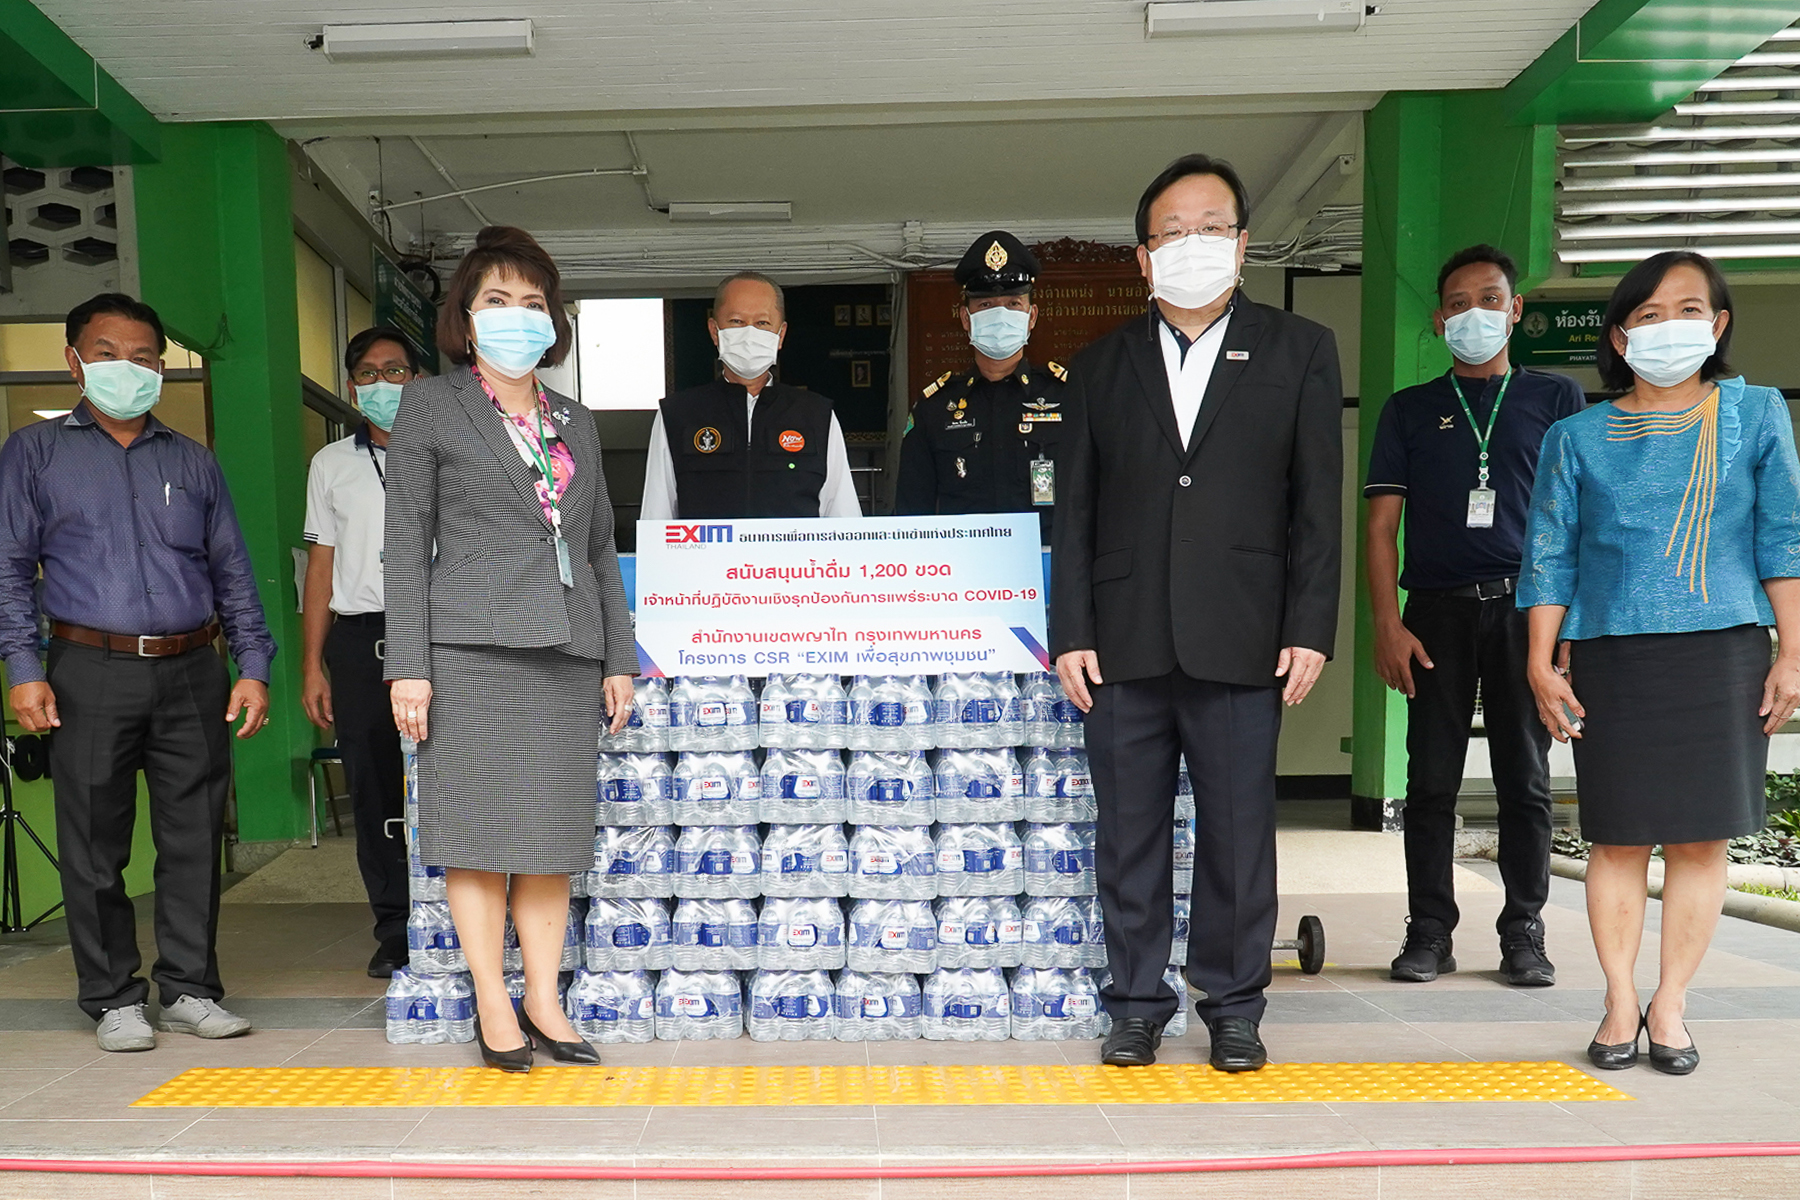 EXIM Thailand Donates Drinking Water to Phayathai District Office in Support for Mission to Fight COVID-19